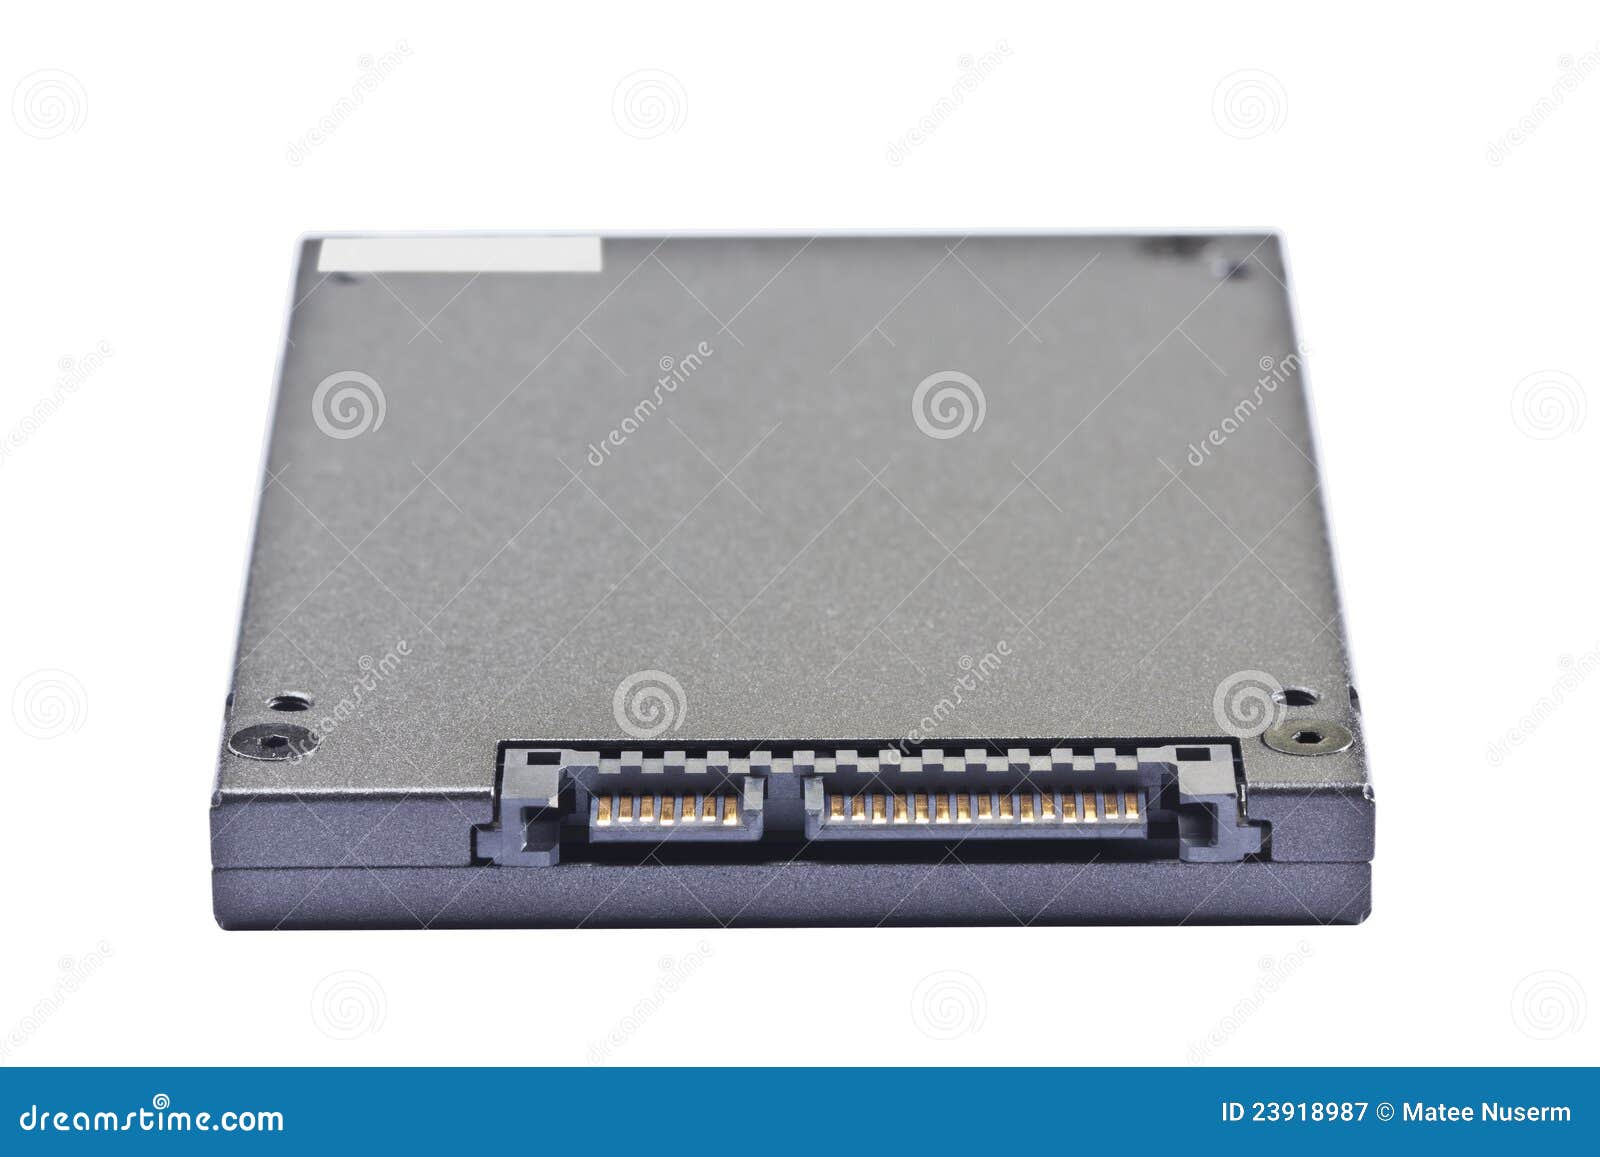 Sata Connector of 2.5 SSD Stock Image of computer, connector: 23918987